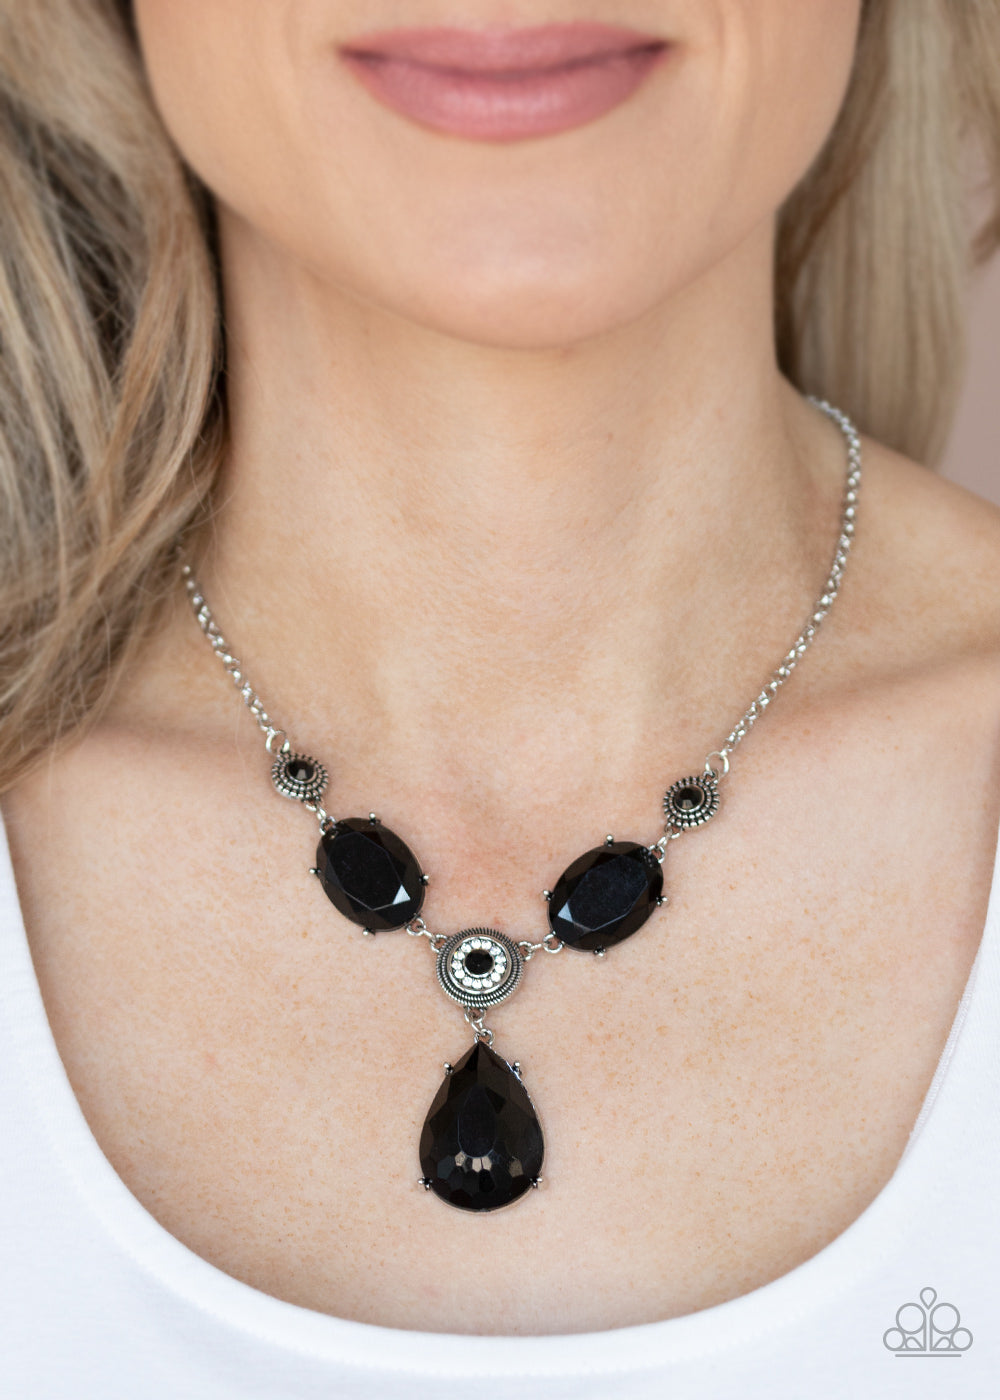 Heirloom Hideaway Black Necklace - Paparazzi Accessories. A collection of black and white rhinestone dotted silver frames link with a pair of black oval gems below the collar. A dramatically oversized black teardrop drips from the center, creating a glamorous pendant. Features an adjustable clasp closure.  All Paparazzi Accessories are lead free and nickel free!   Sold as one individual necklace. Includes one pair of matching earrings.